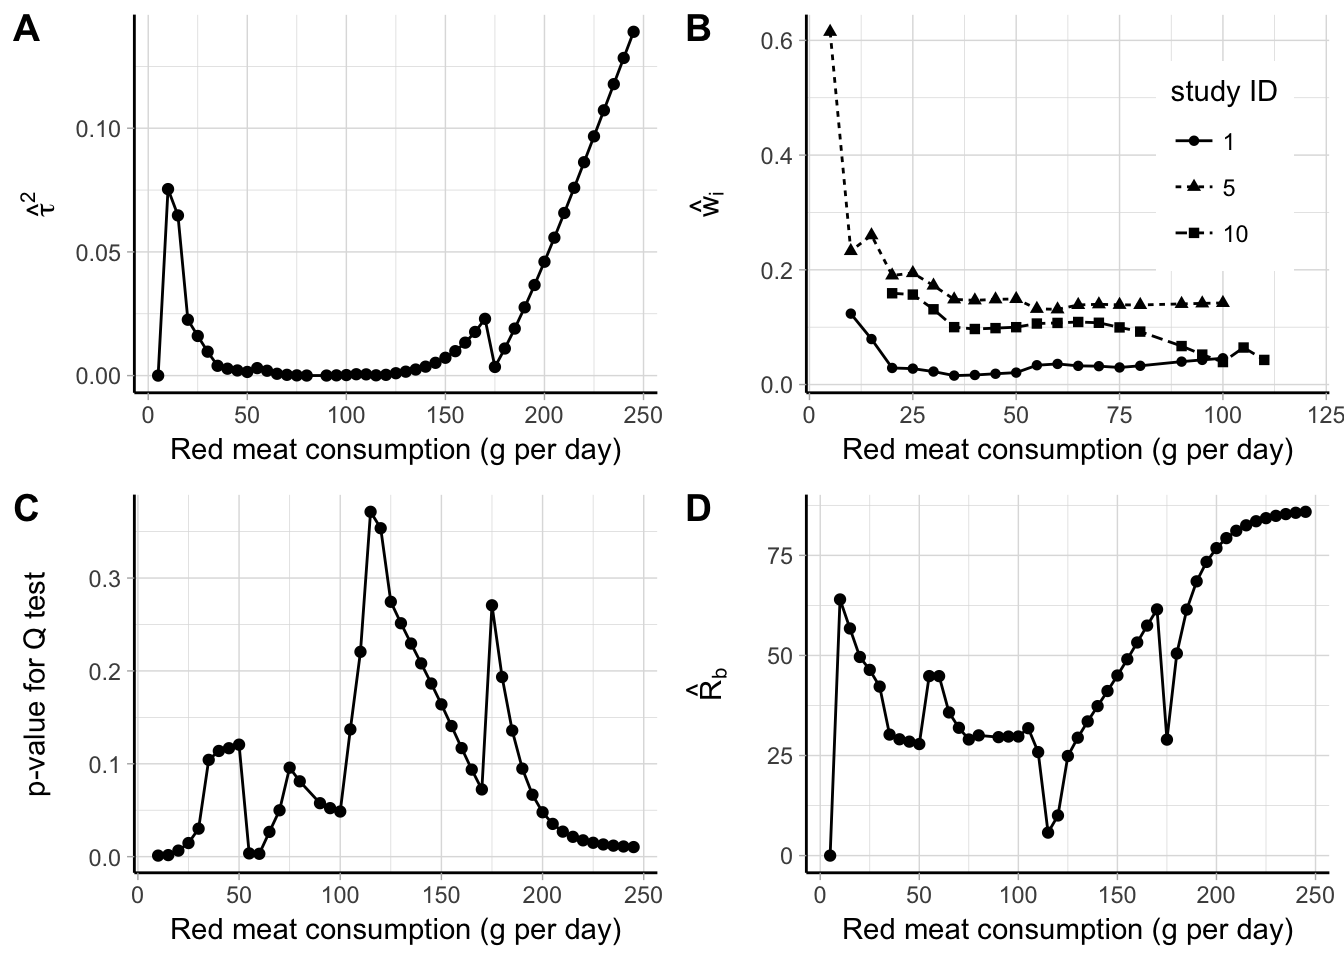 Point-wise results for a meta-analysis between red meat consumption (g per day) and bladder cancer risk: estimates of $\hat \tau^2$ (A), random-effects weights for three studies (B), $p$ value for ther $Q$ test (C), and $\hat R_b$ (D).